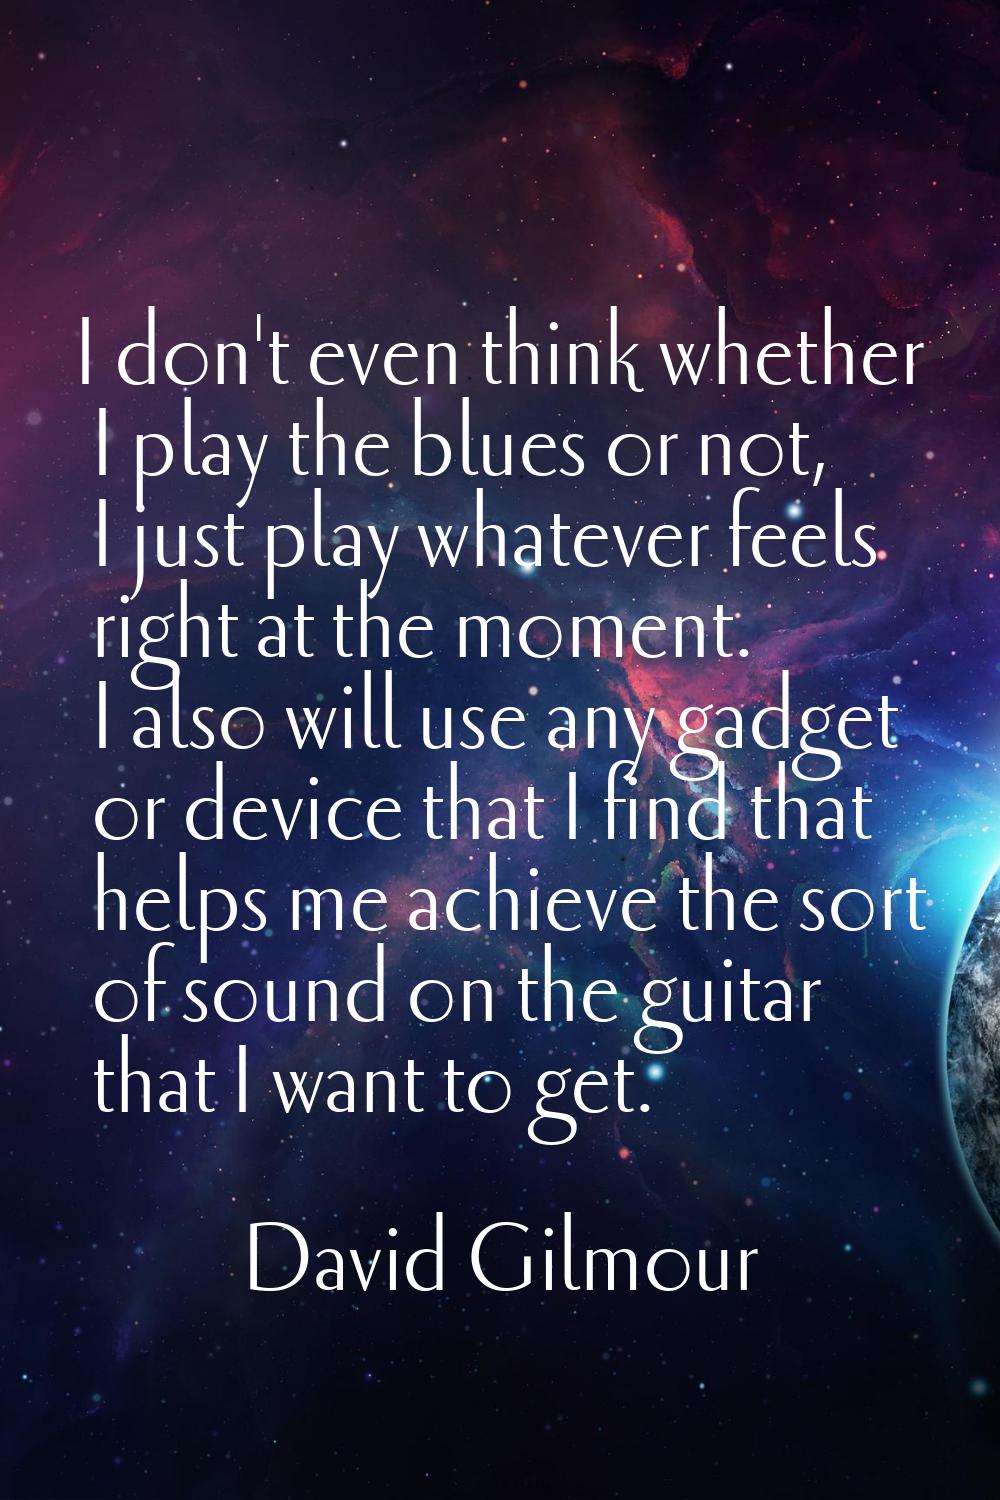 I don't even think whether I play the blues or not, I just play whatever feels right at the moment.